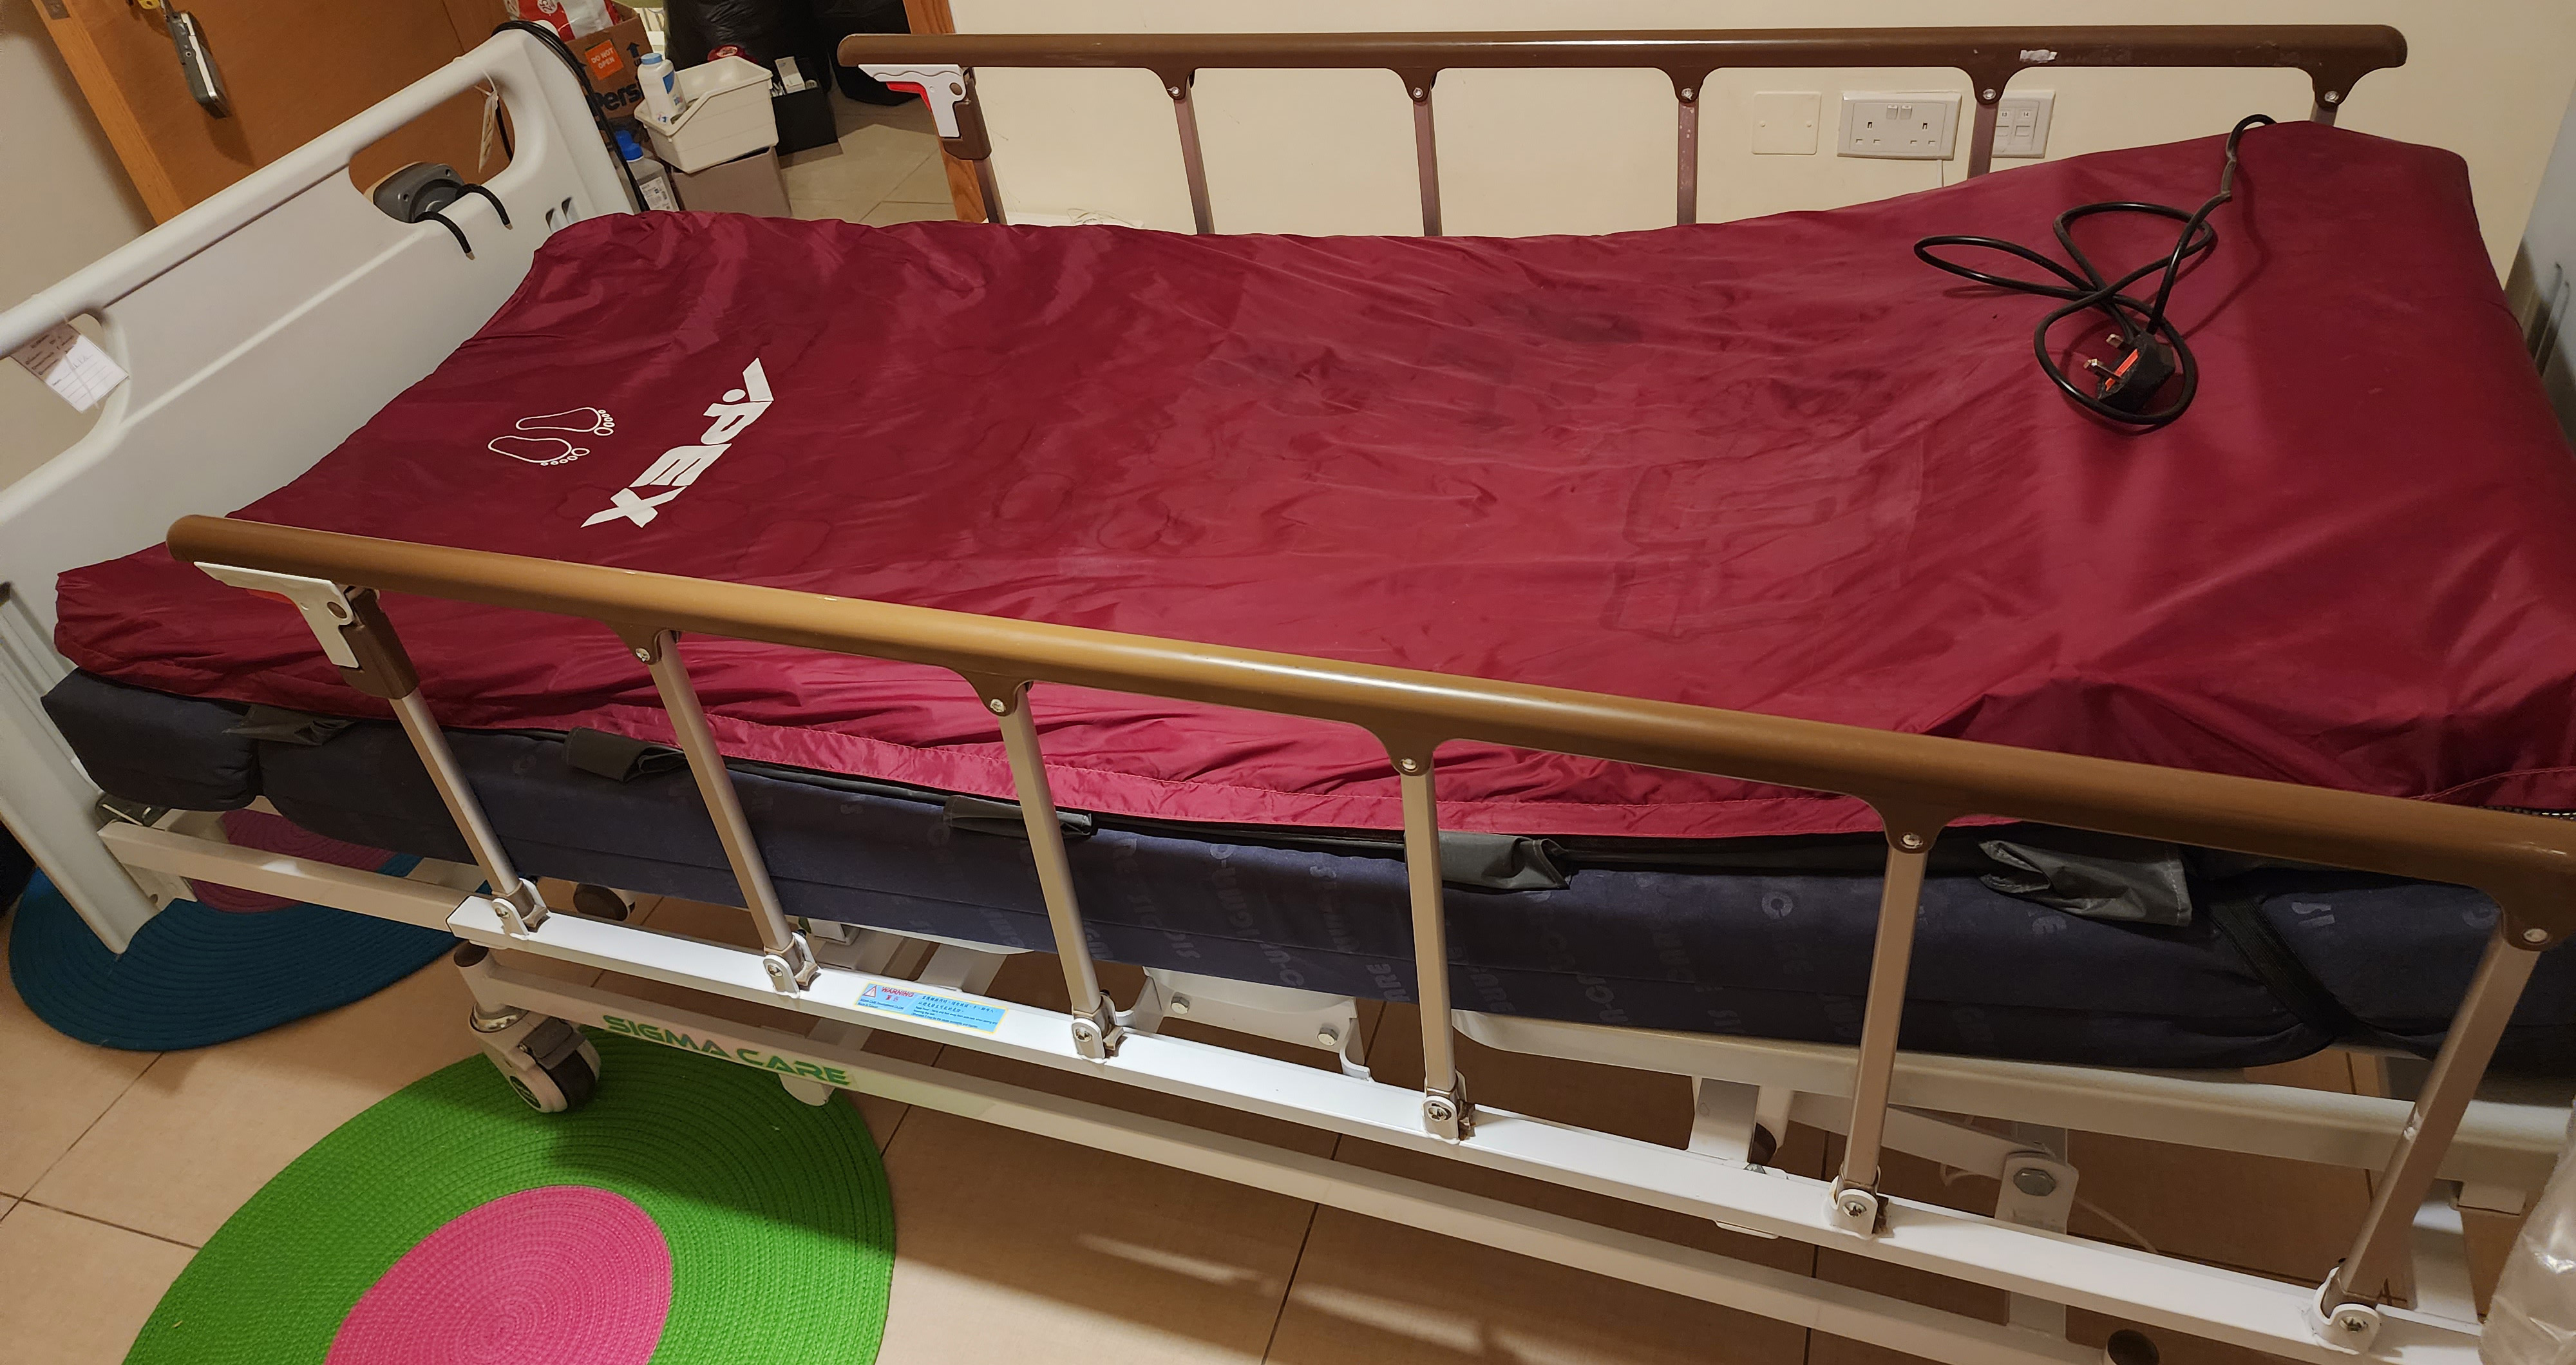 Sigma Care fully electrical bed with Apex automatic mattress